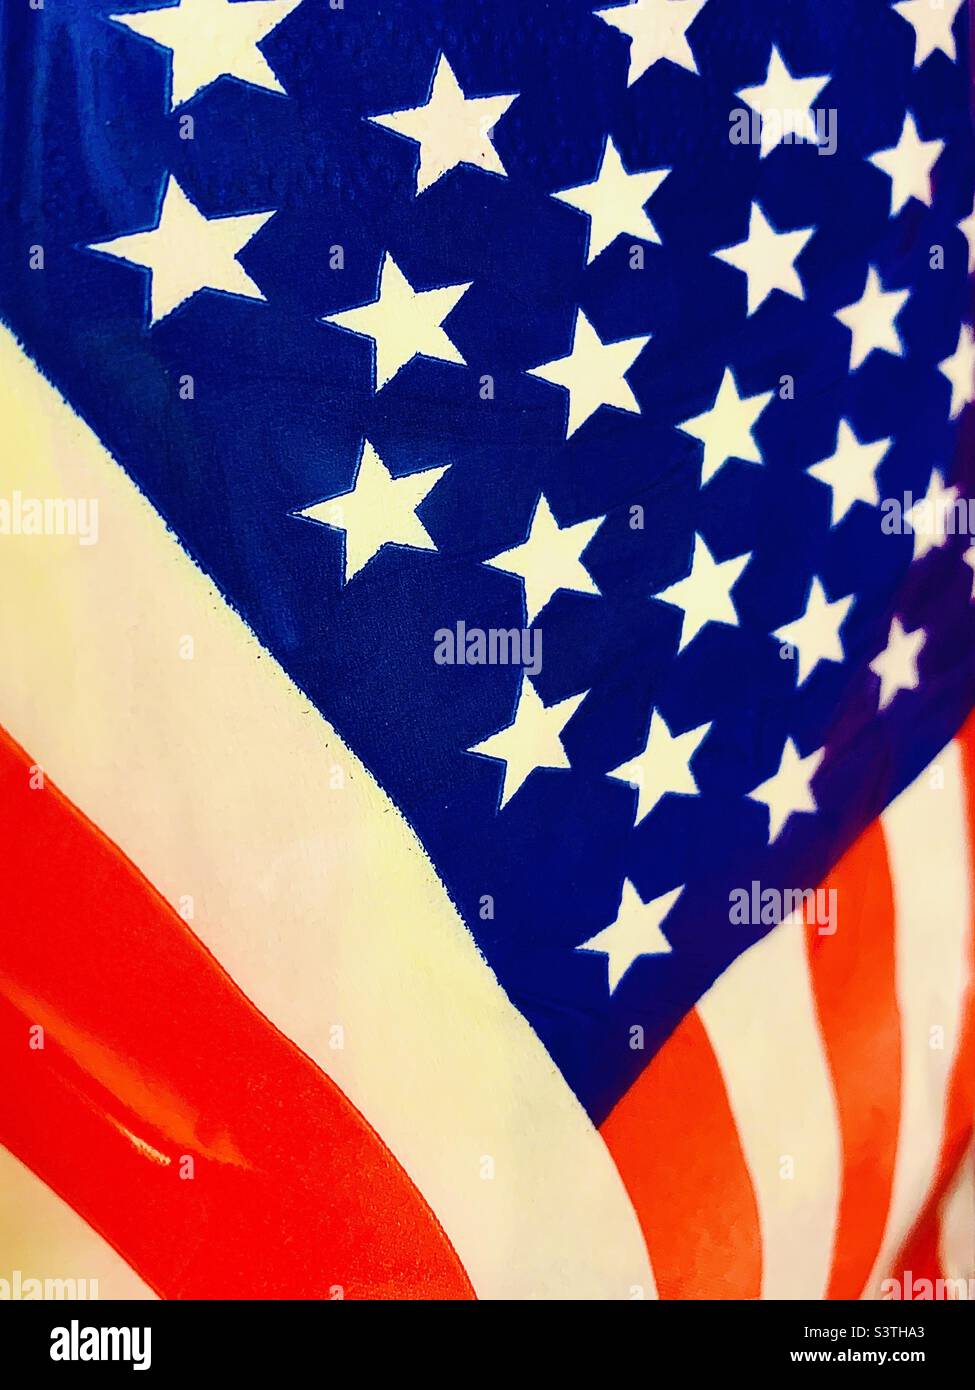 American flag background Stock Photo